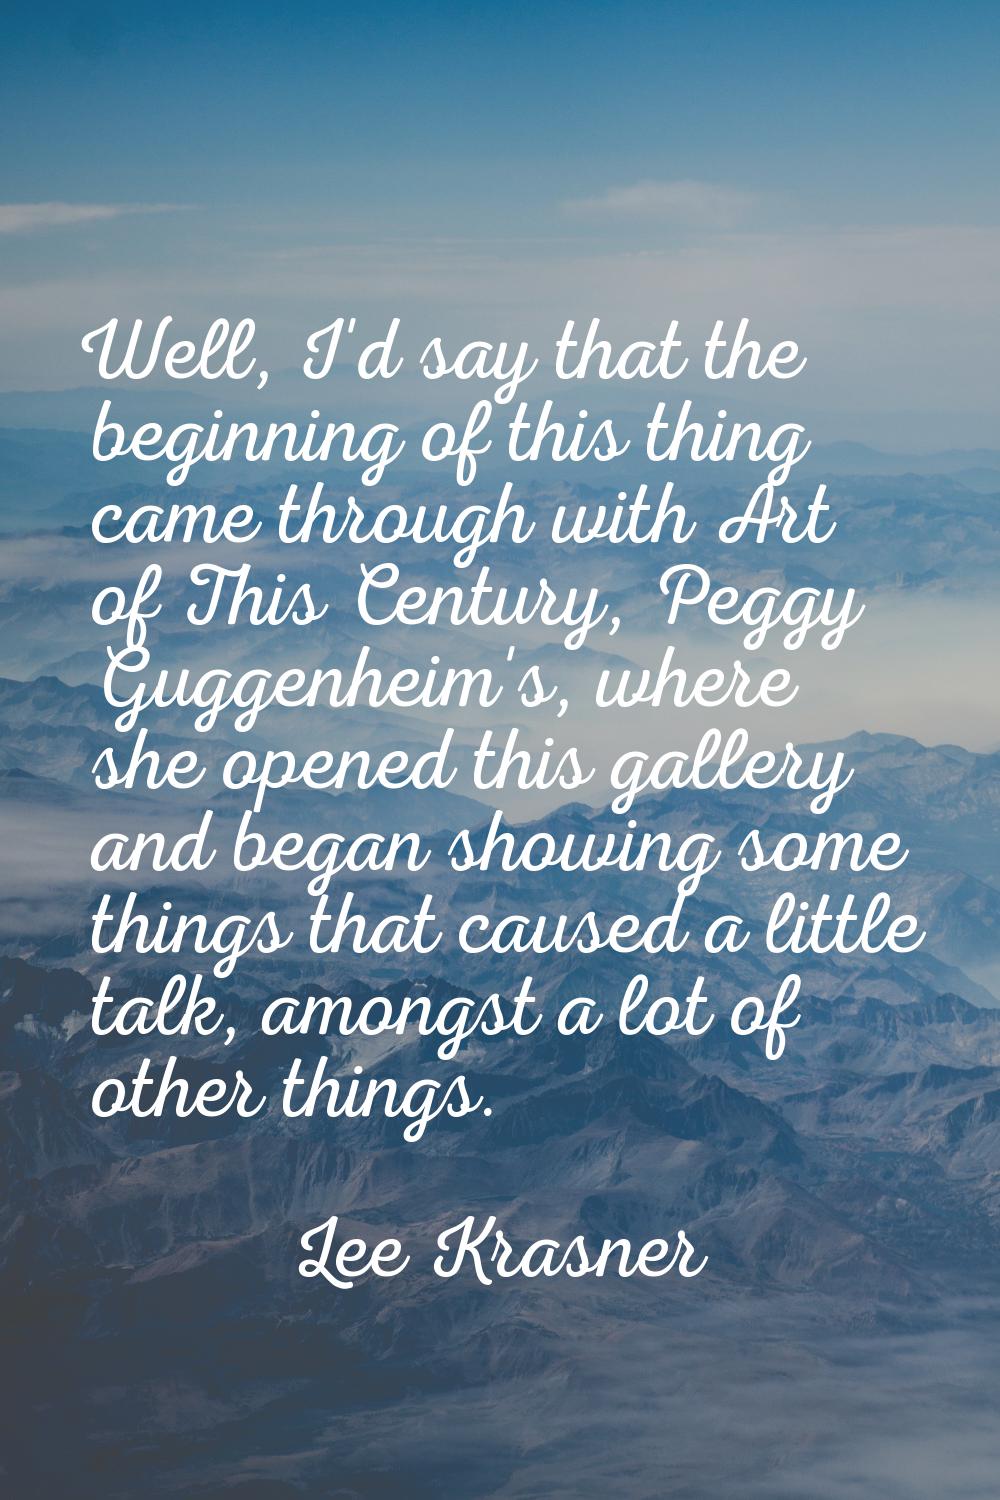 Well, I'd say that the beginning of this thing came through with Art of This Century, Peggy Guggenh